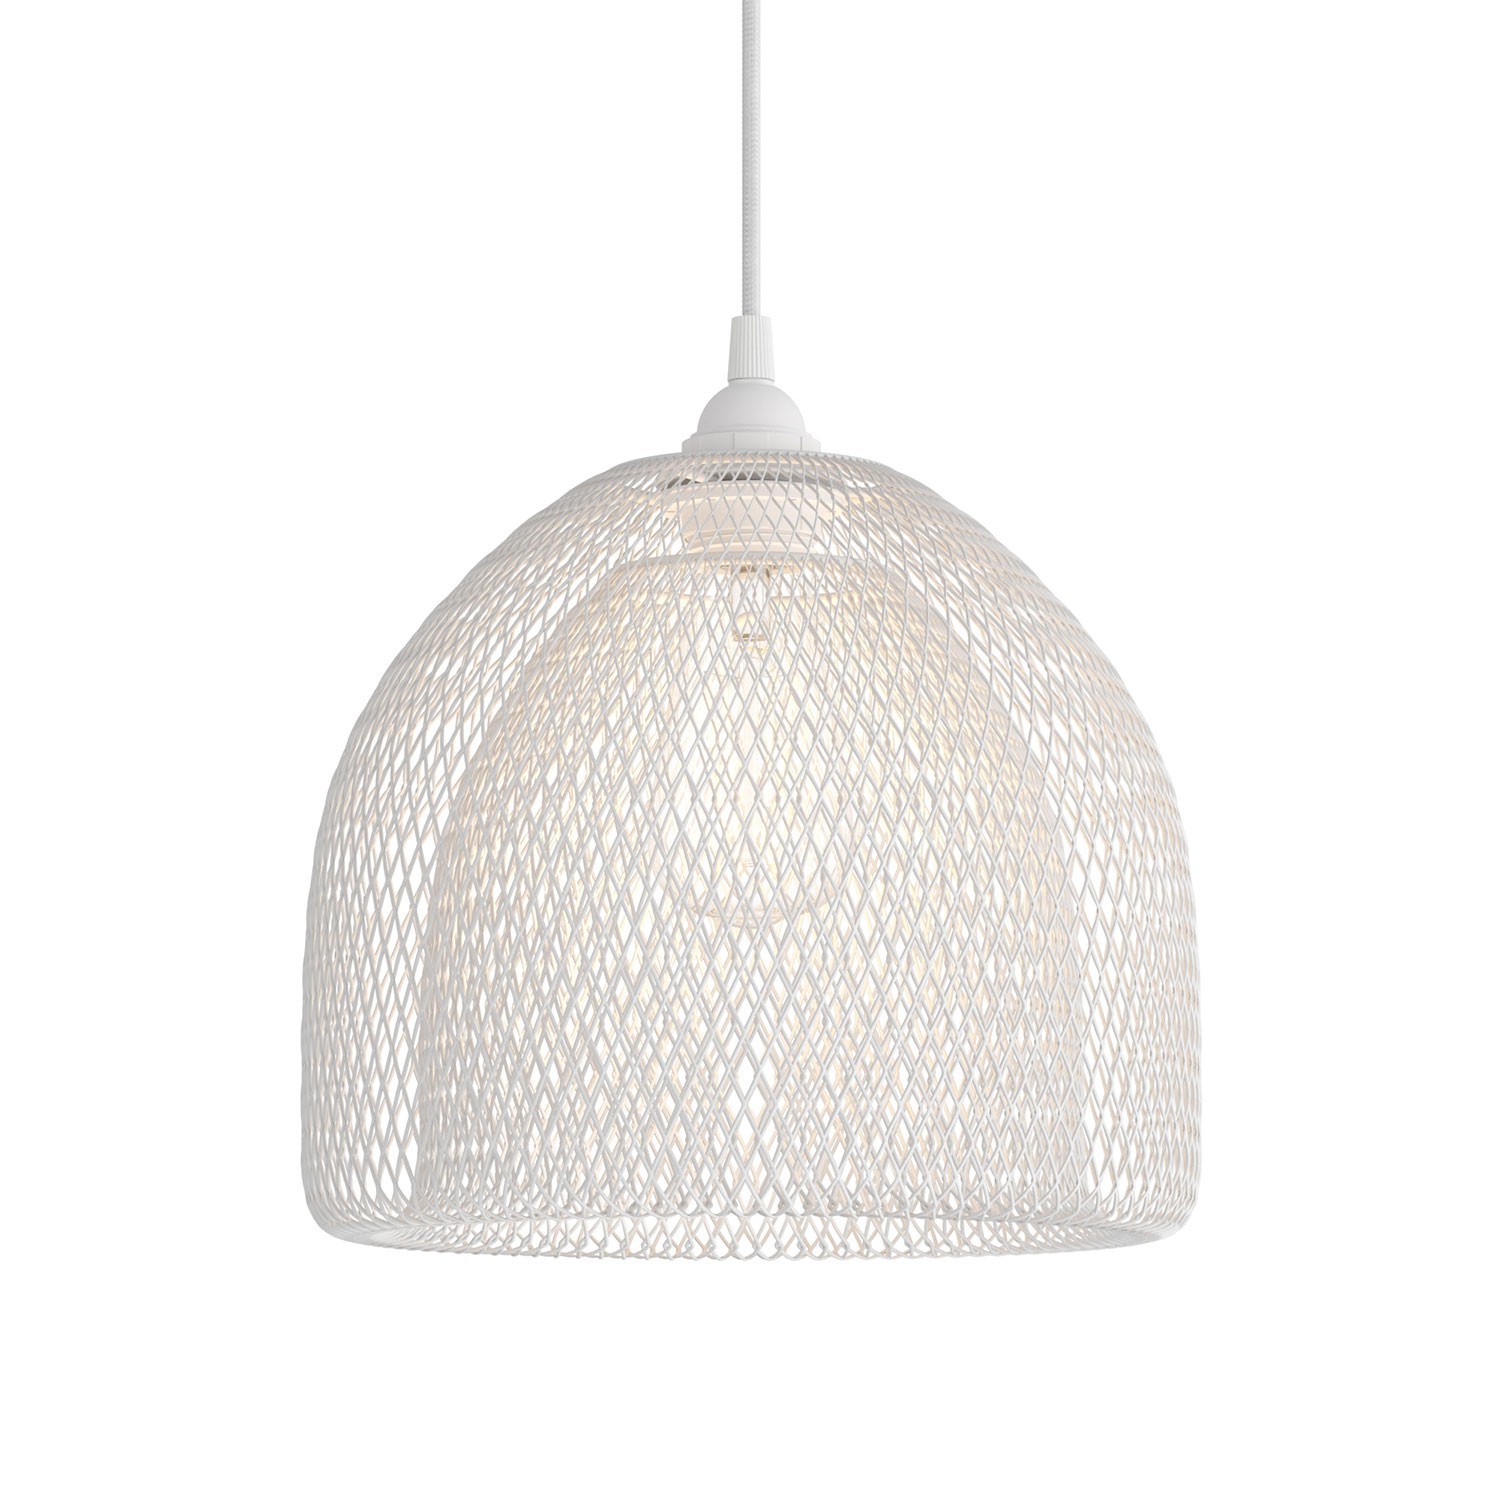 Pendant lamp with textile cable, Ghostbell XL cage lampshade and metal details - Made in Italy